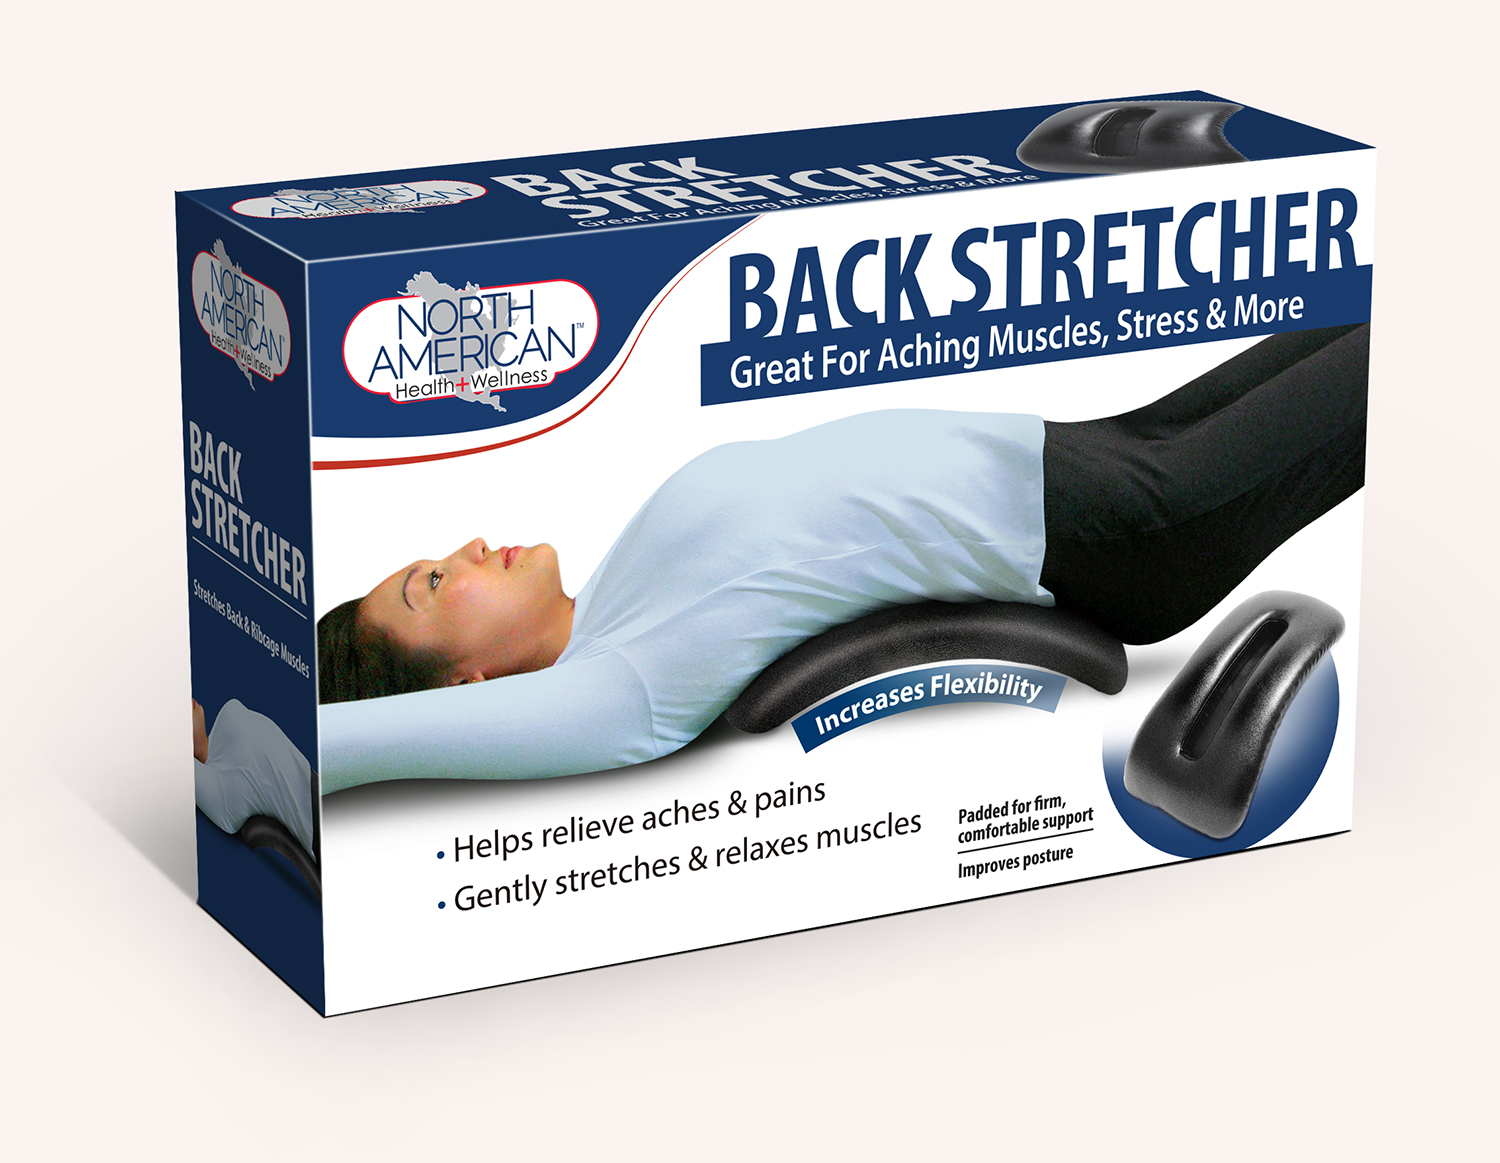 North American Healthcare - Arched Back Stretcher - Great for back stretch and usage as a spine board - image 3 of 3